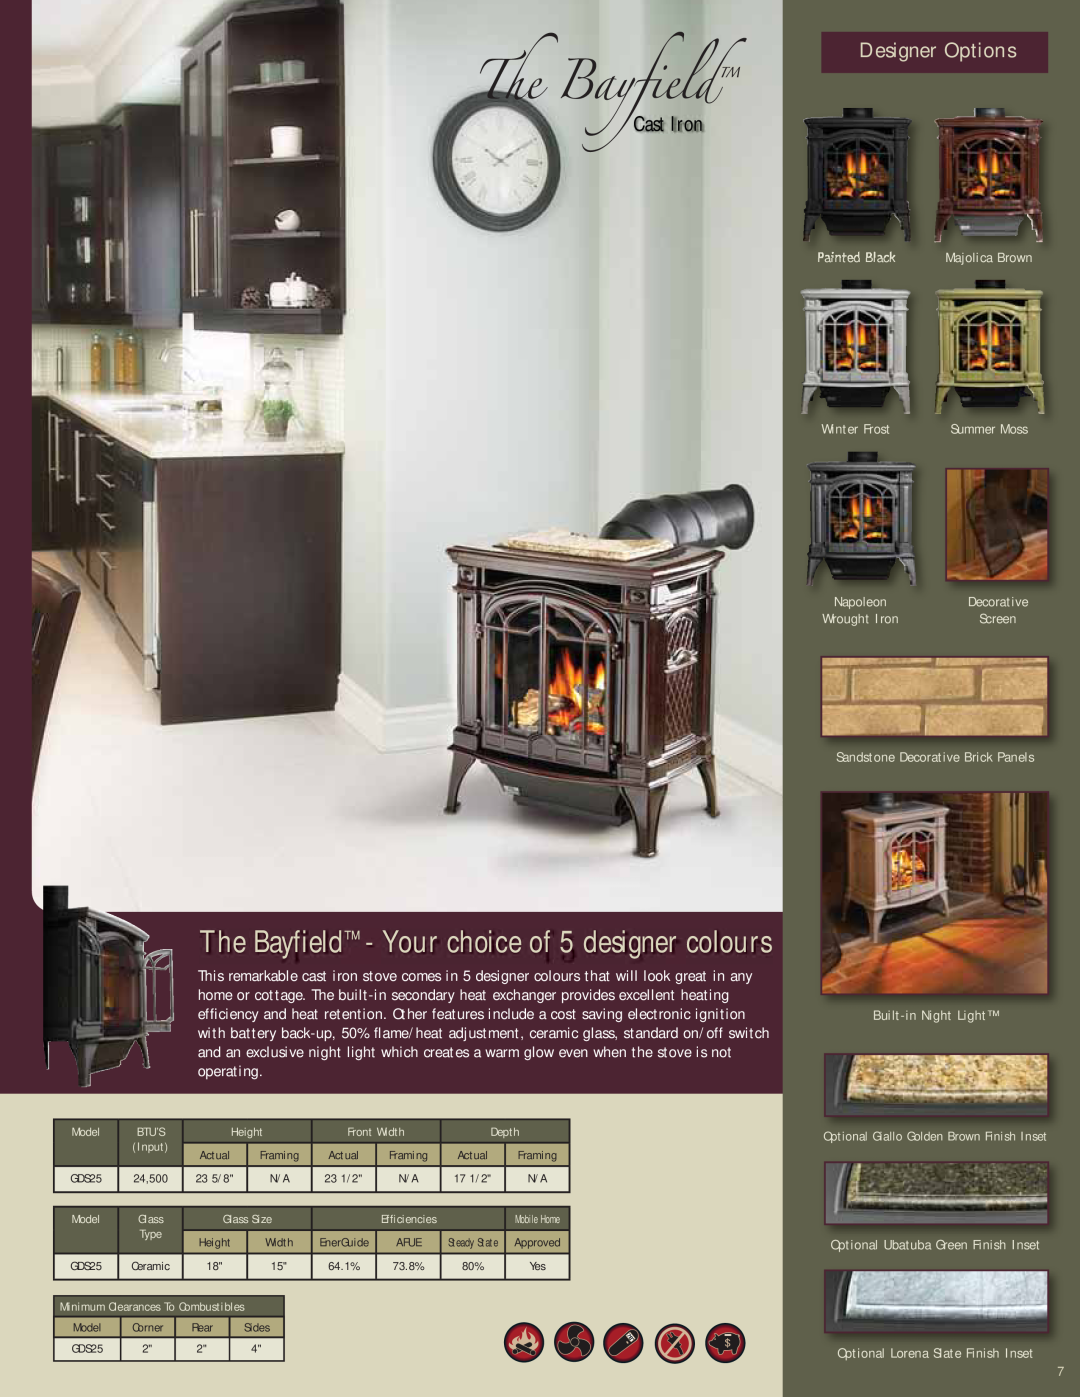 Napoleon Fireplaces Gas Burning Stoves manual The Bayfield - Your choice of 5 designer colours, Designer Options, Cast Iron 